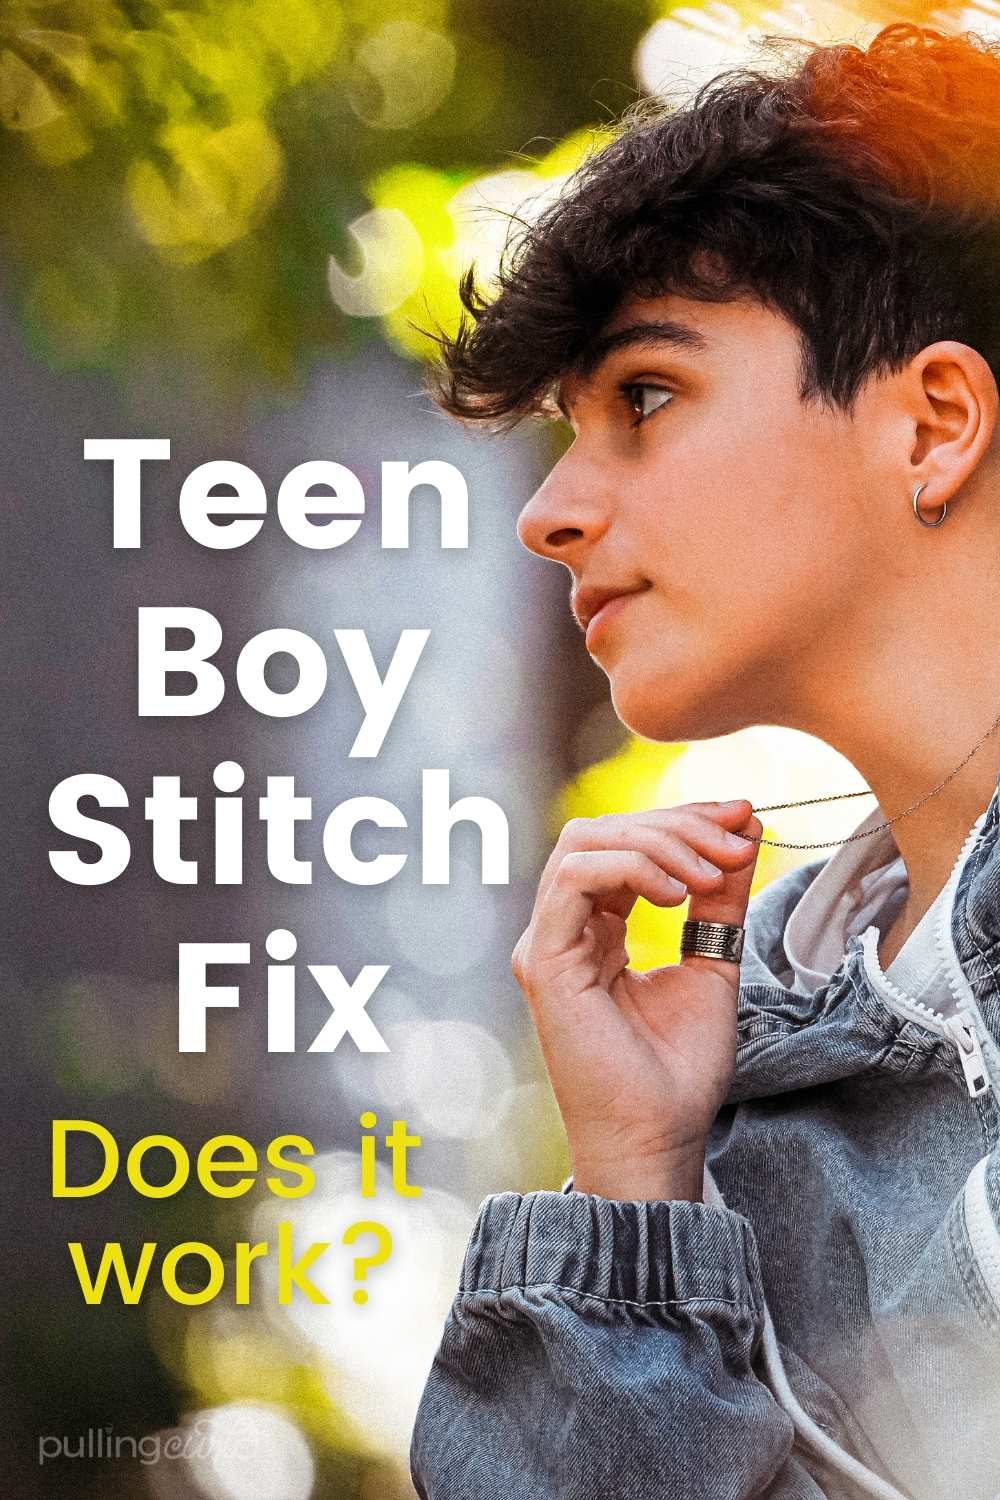 Fashion for teenage boys can be hard.  Will a teenage boy stitch fix subscription help?  This review of a 14 year old boy, size 14 will tell the tale. via @pullingcurls